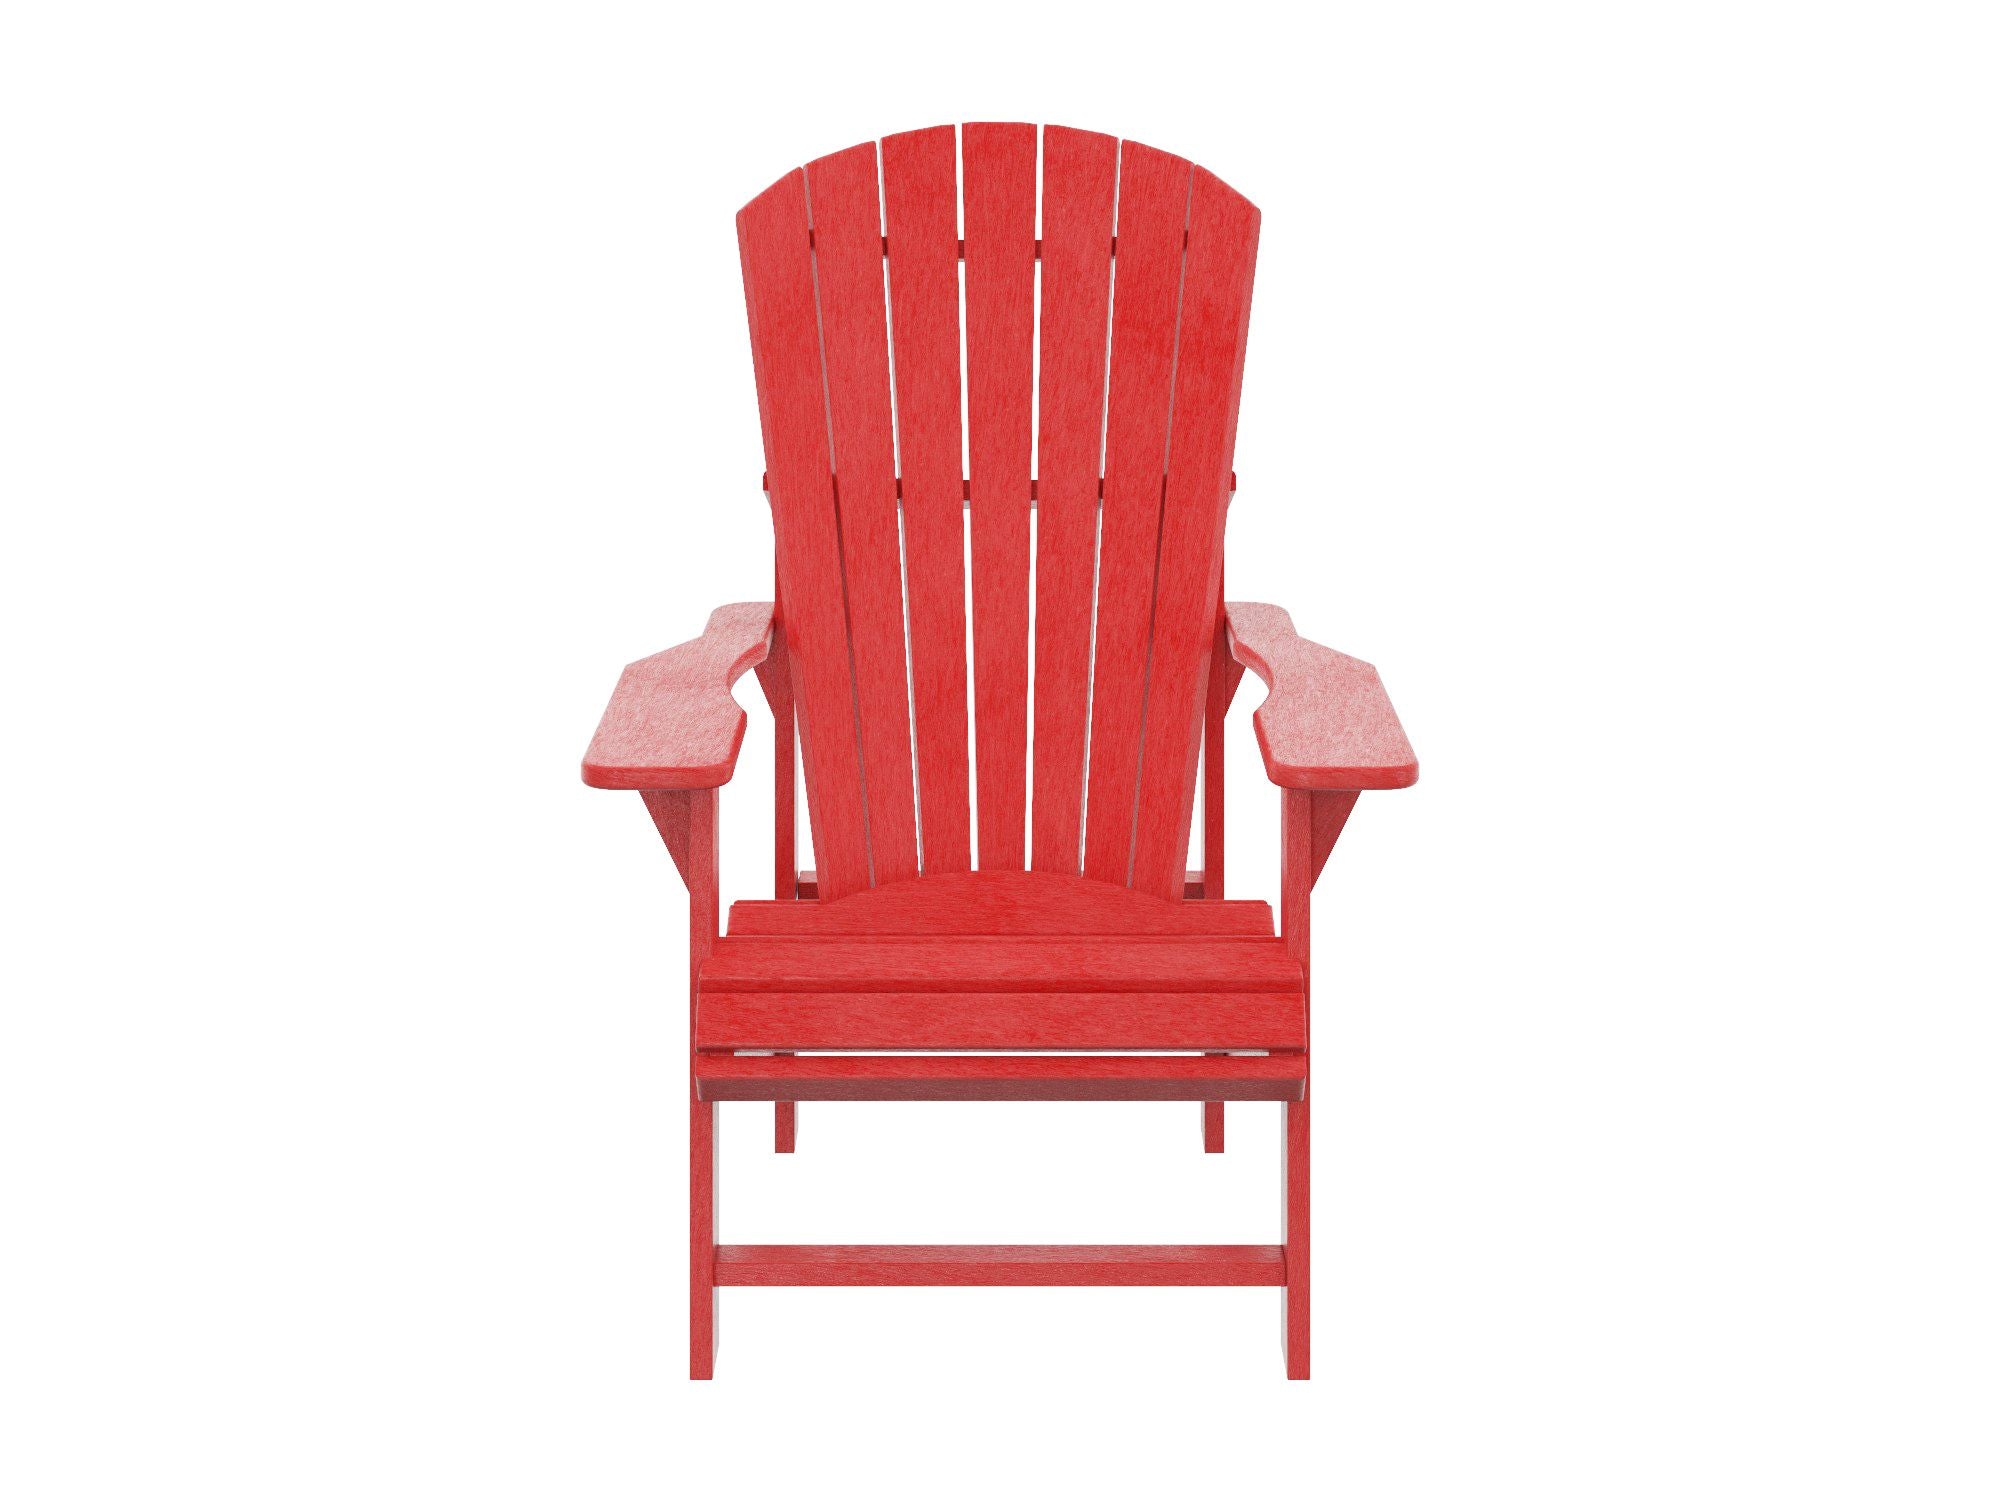 C.R. Plastic Products Upright Adirondack Chair Outdoor Chairs